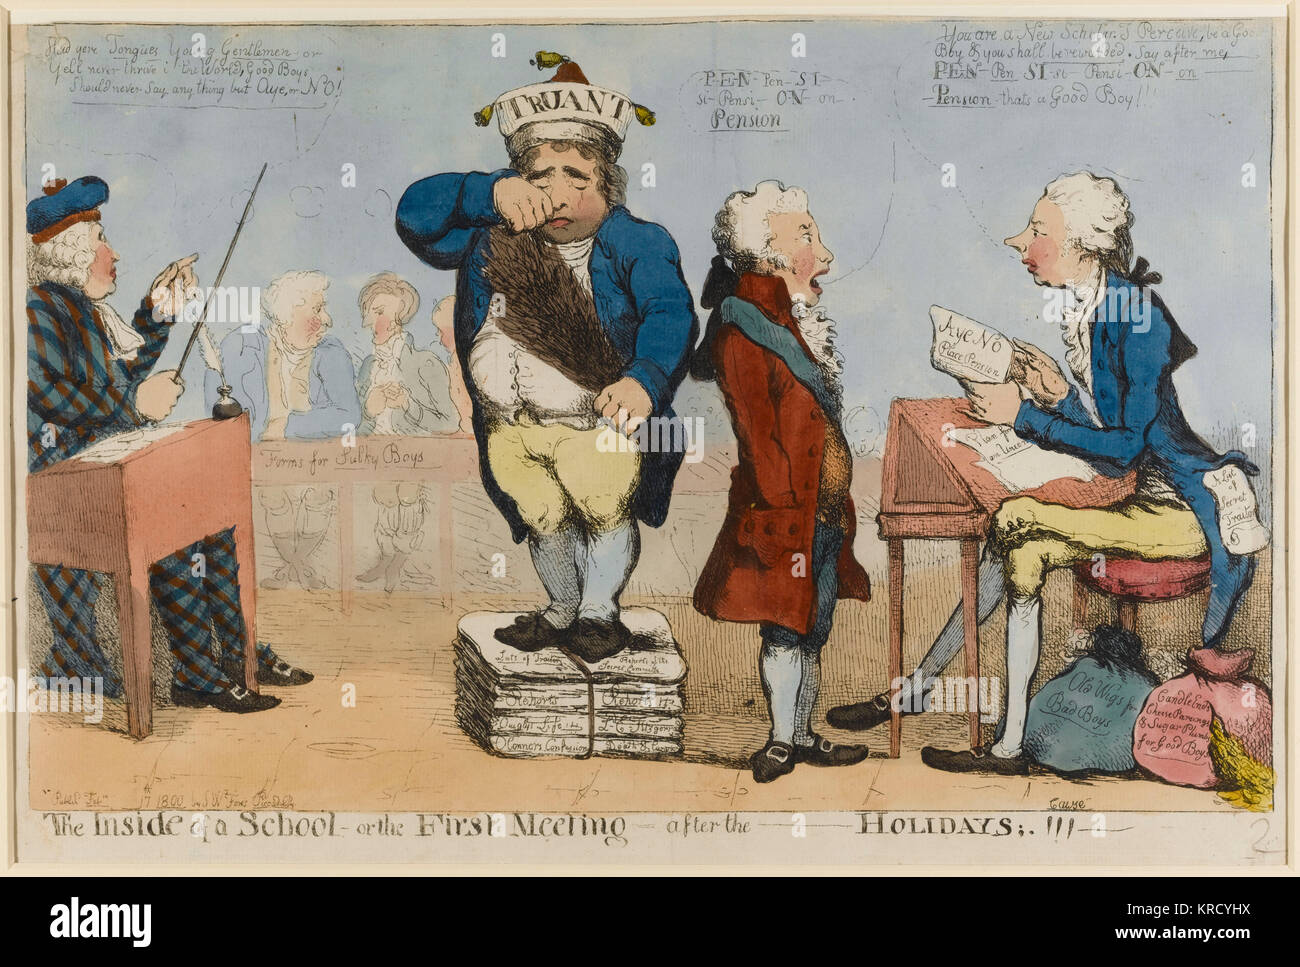 Satirical cartoon, The Inside of a School - or the first meeting - after the - Holidays!!!  A satire on the return of Fox to Parliament, for a debate on the peace overtures from France, having left in 1797. He is in the centre of the classroom wearing a fool's cap labelled 'Truant'. The bundled papers that he stands on carry labels alluding to controversial episodes in which he had become embroiled.  At desks on either side of the room sit Dundas, wearing his Scottish tartan; Pitt. Sheridan and Burdett are the 'Sulky Boys'.       Date: 1800 Stock Photo